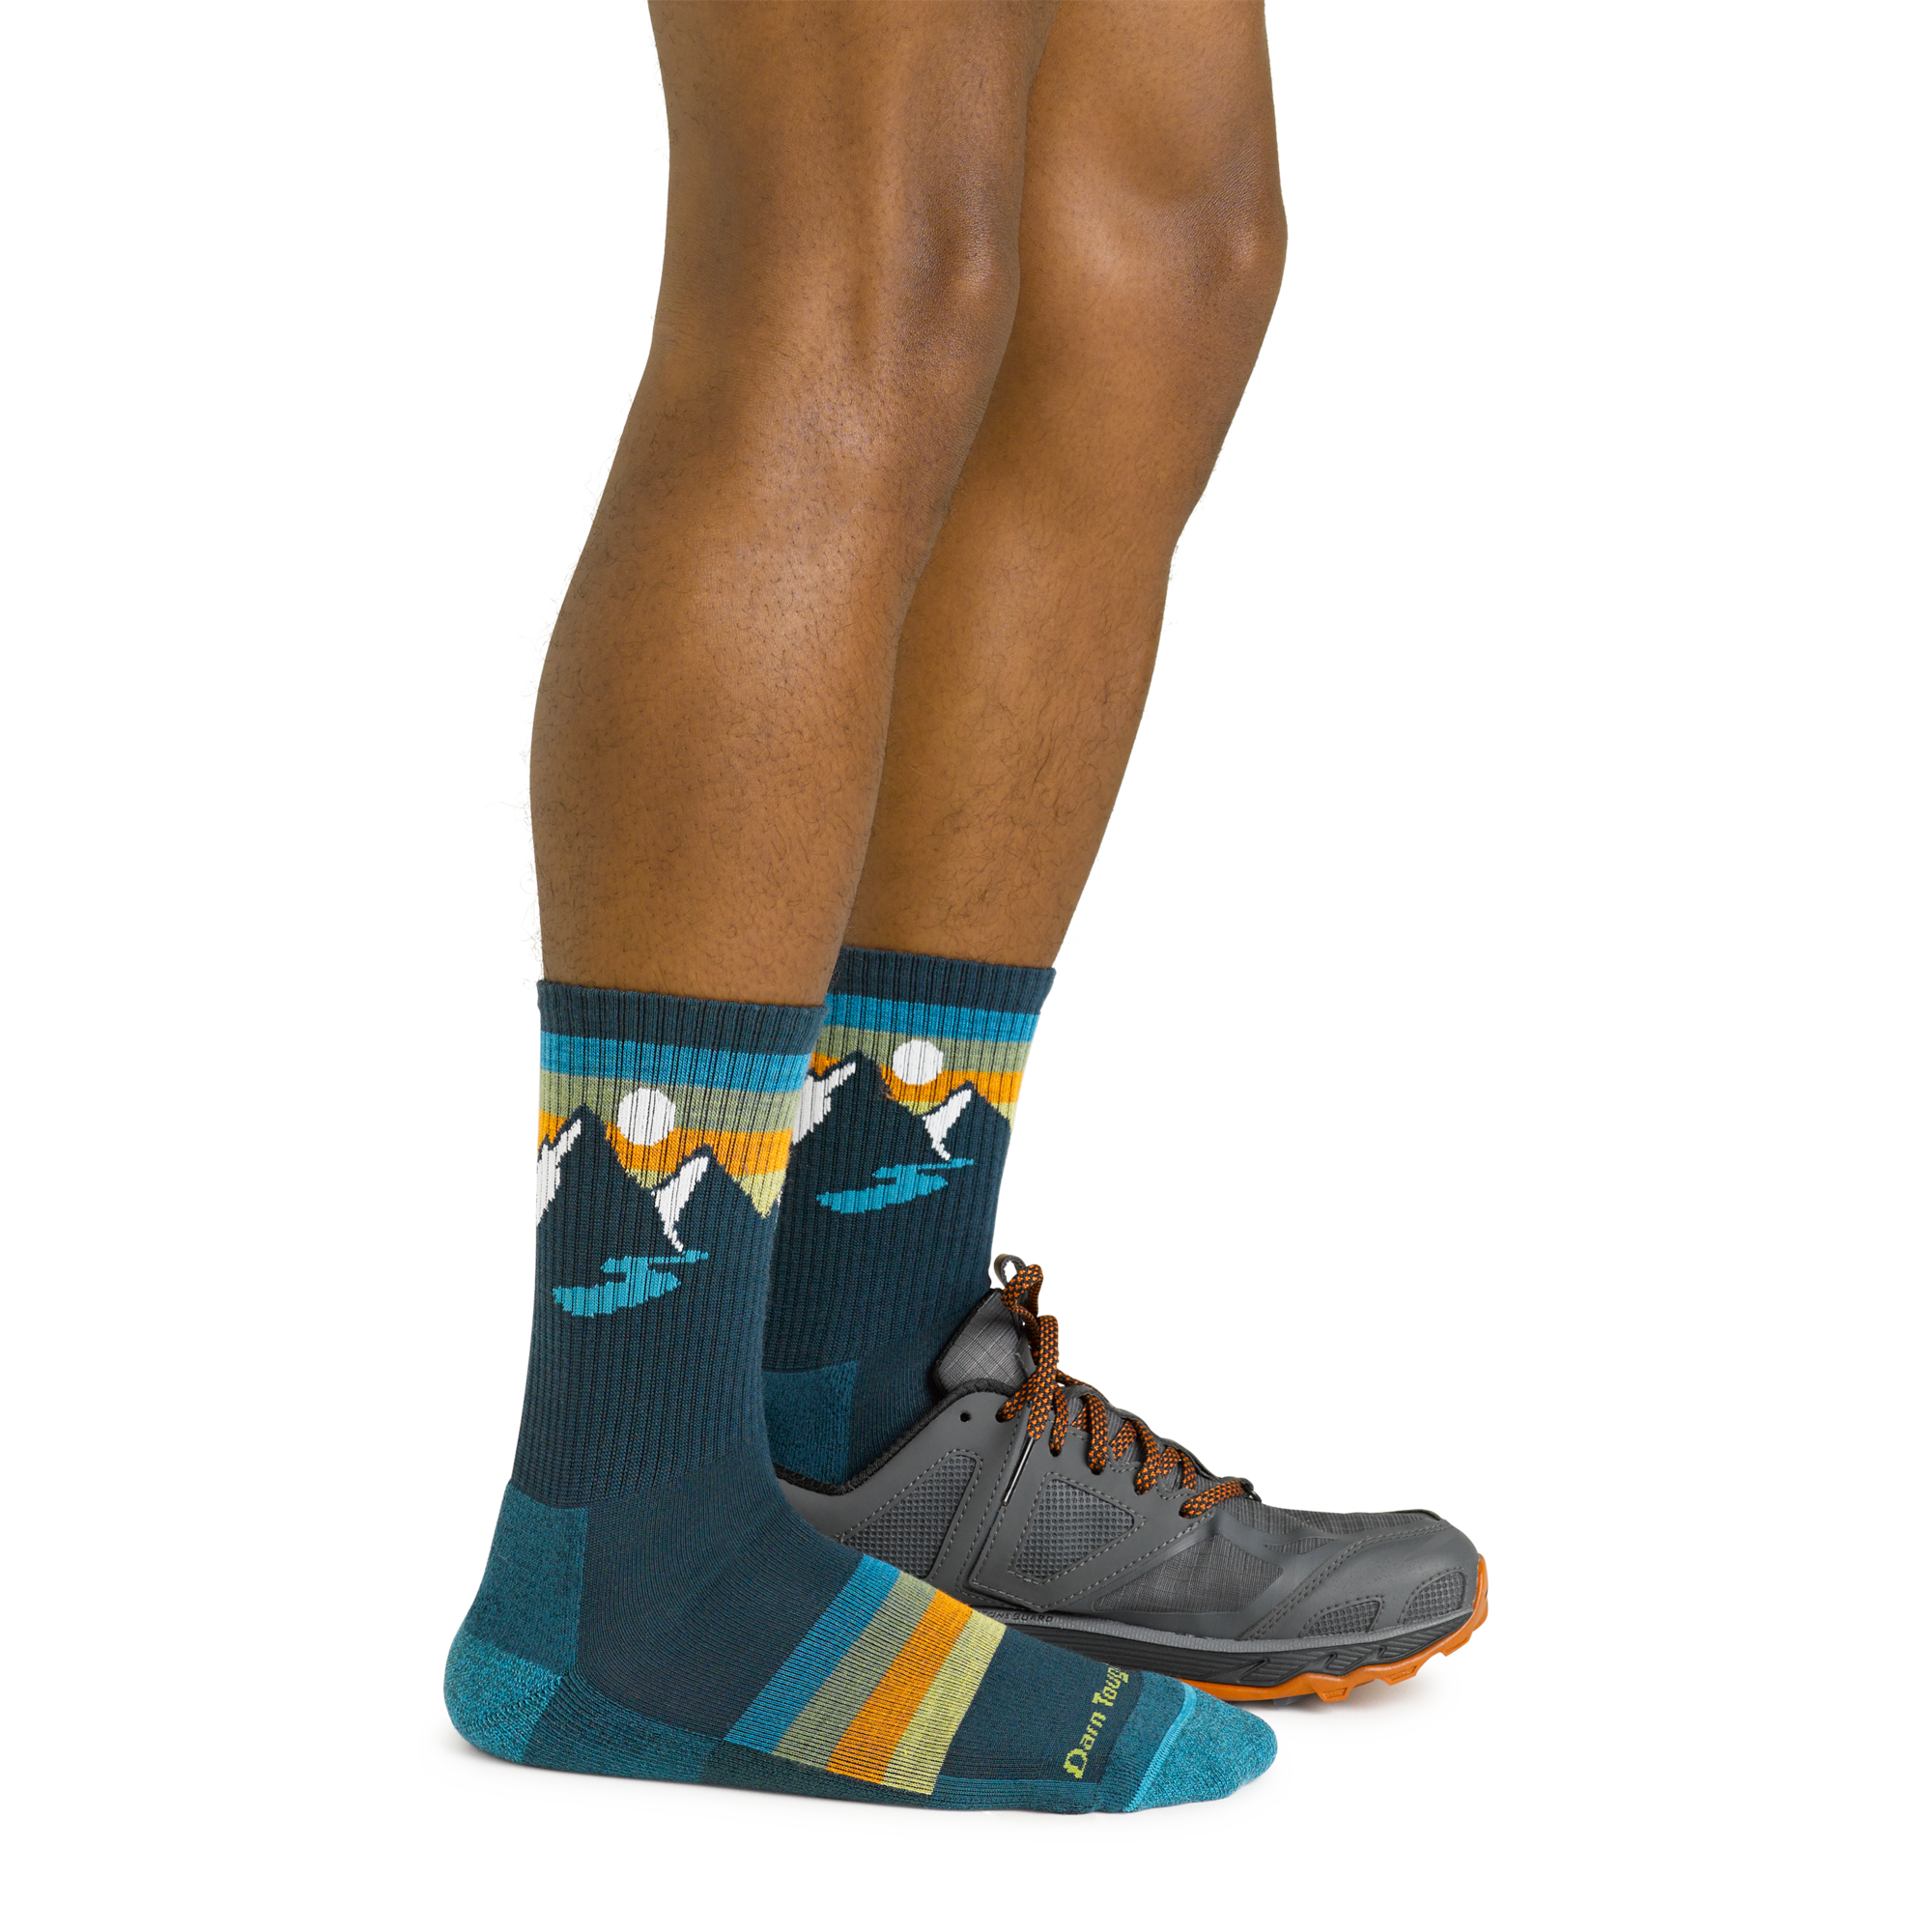 Model wearing the men's sunset ridge micro crew hiking sock in bottle blue with a gray sneaker on his left foot